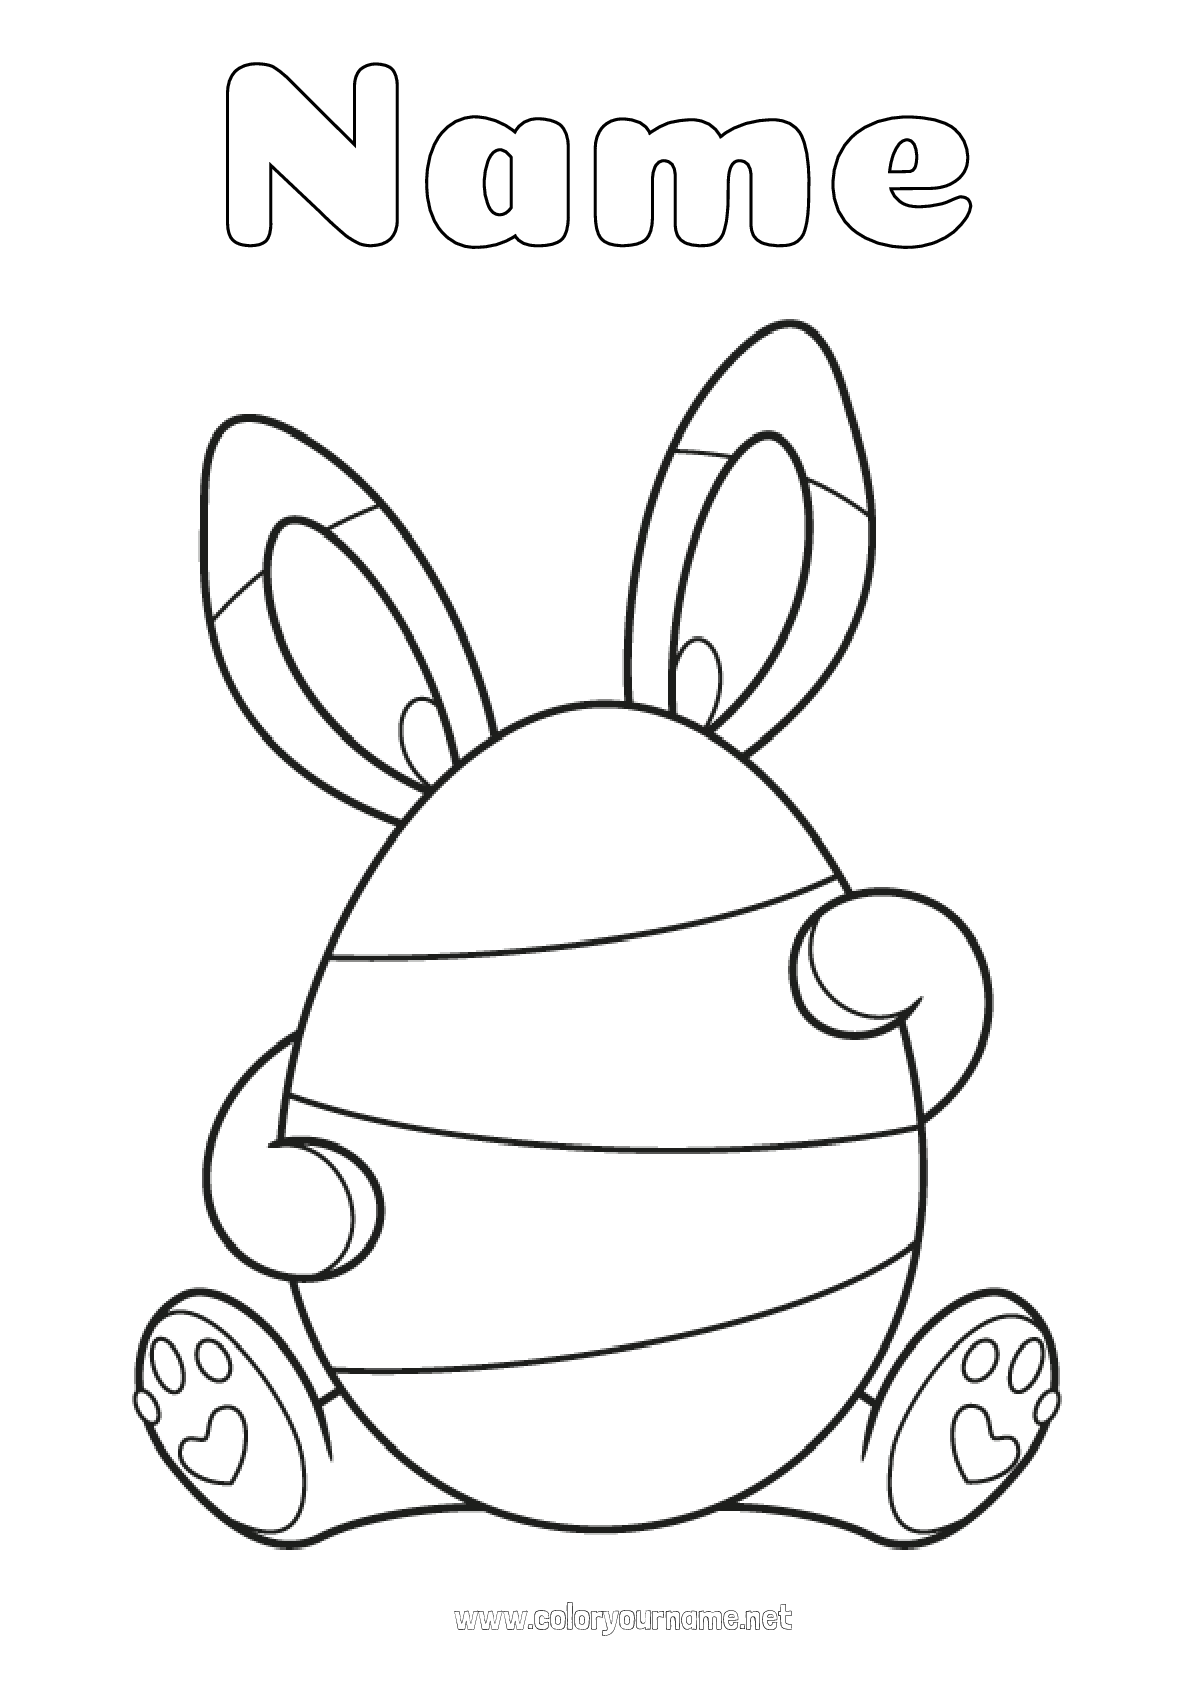 Coloring page No.1464 - Bunny Animal Easter eggs